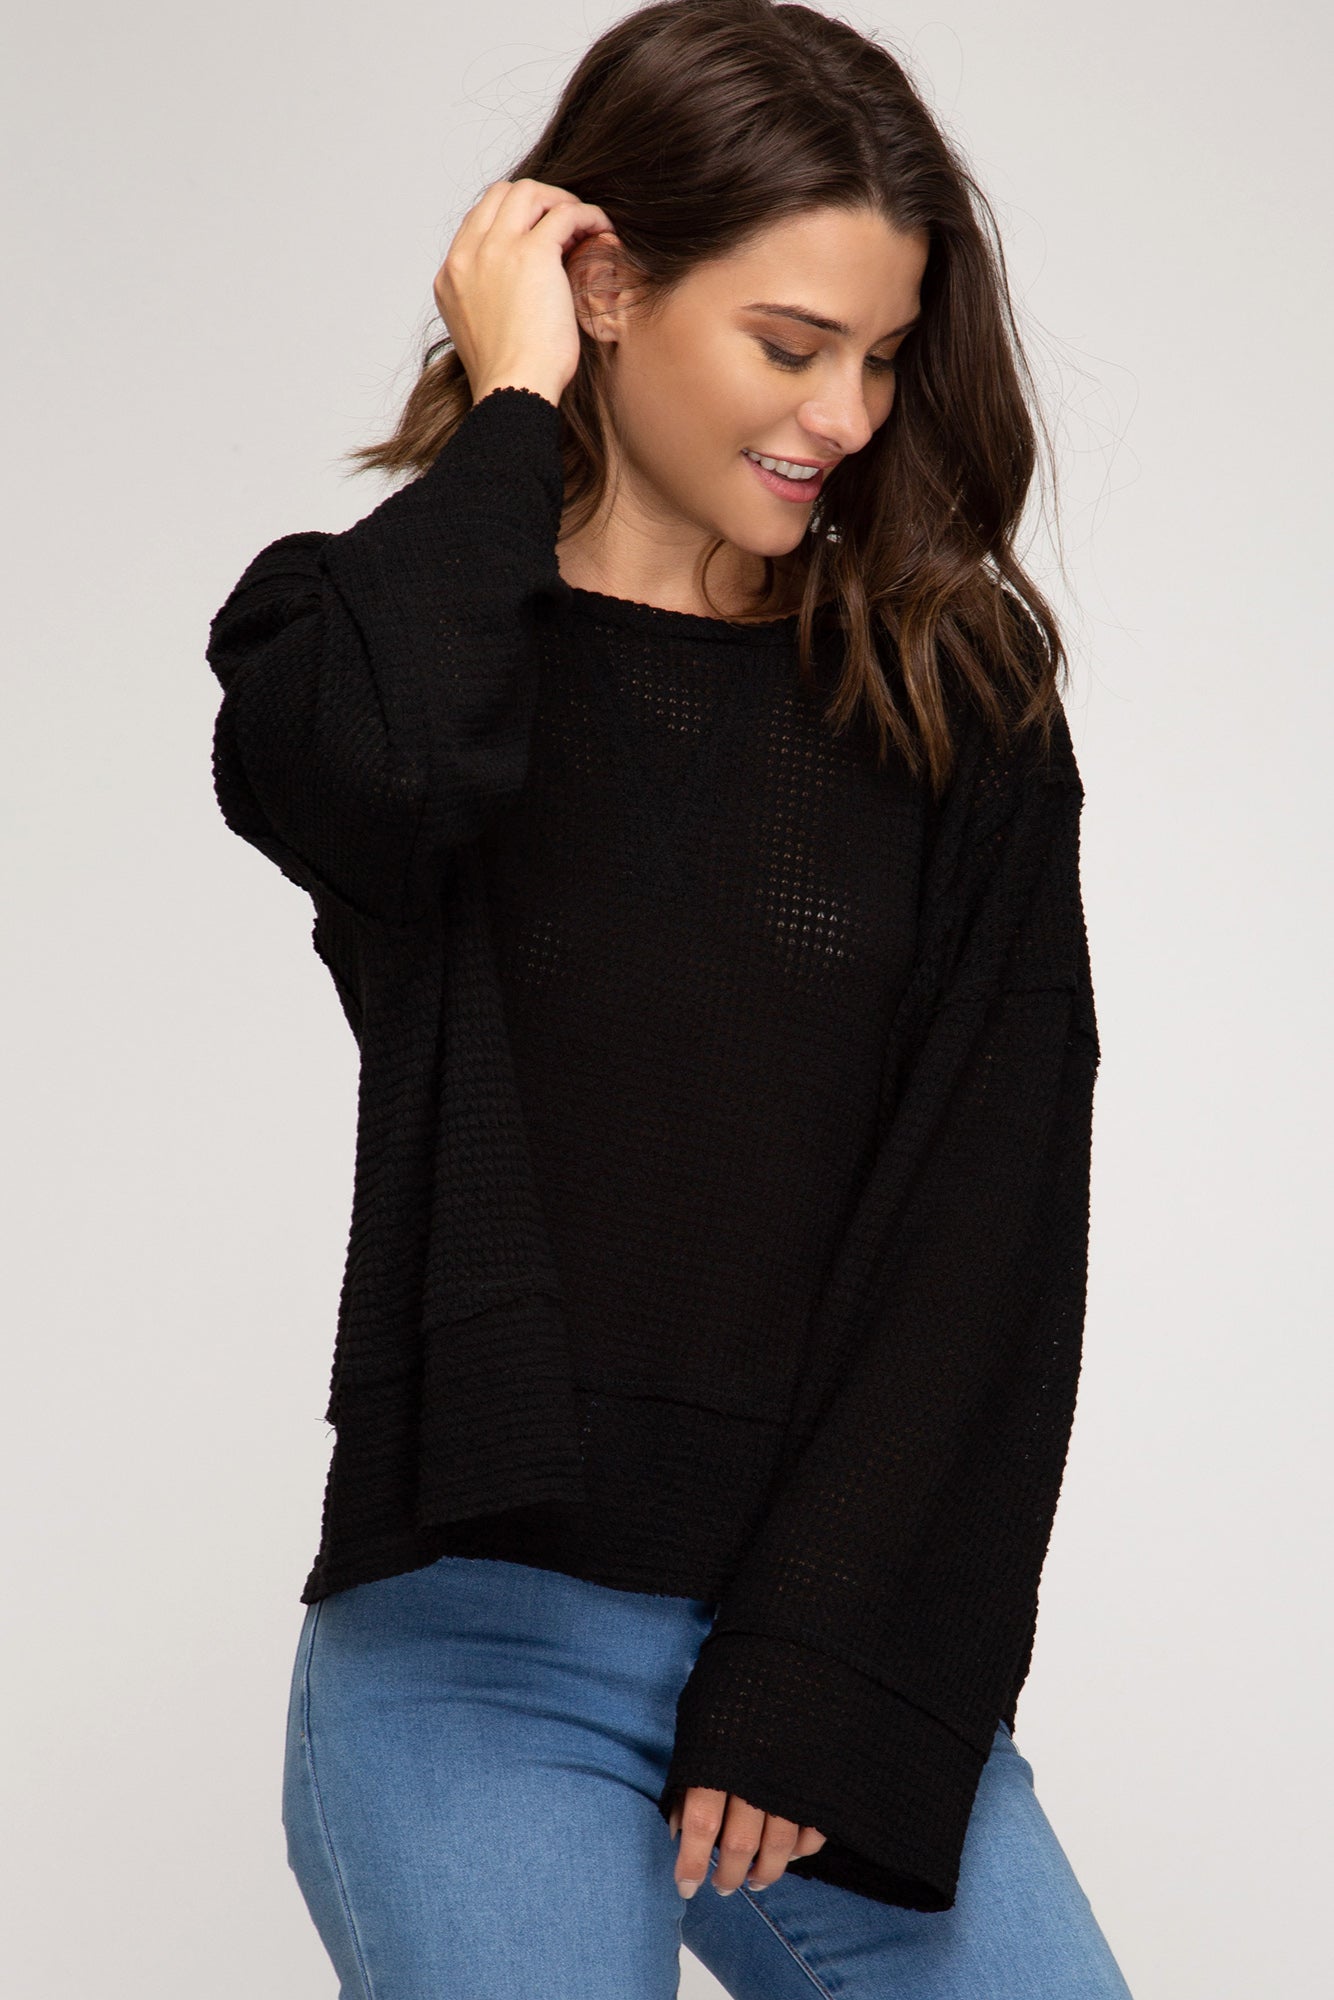 Long Sleeve Thermal Knit With Wide Sleeves!